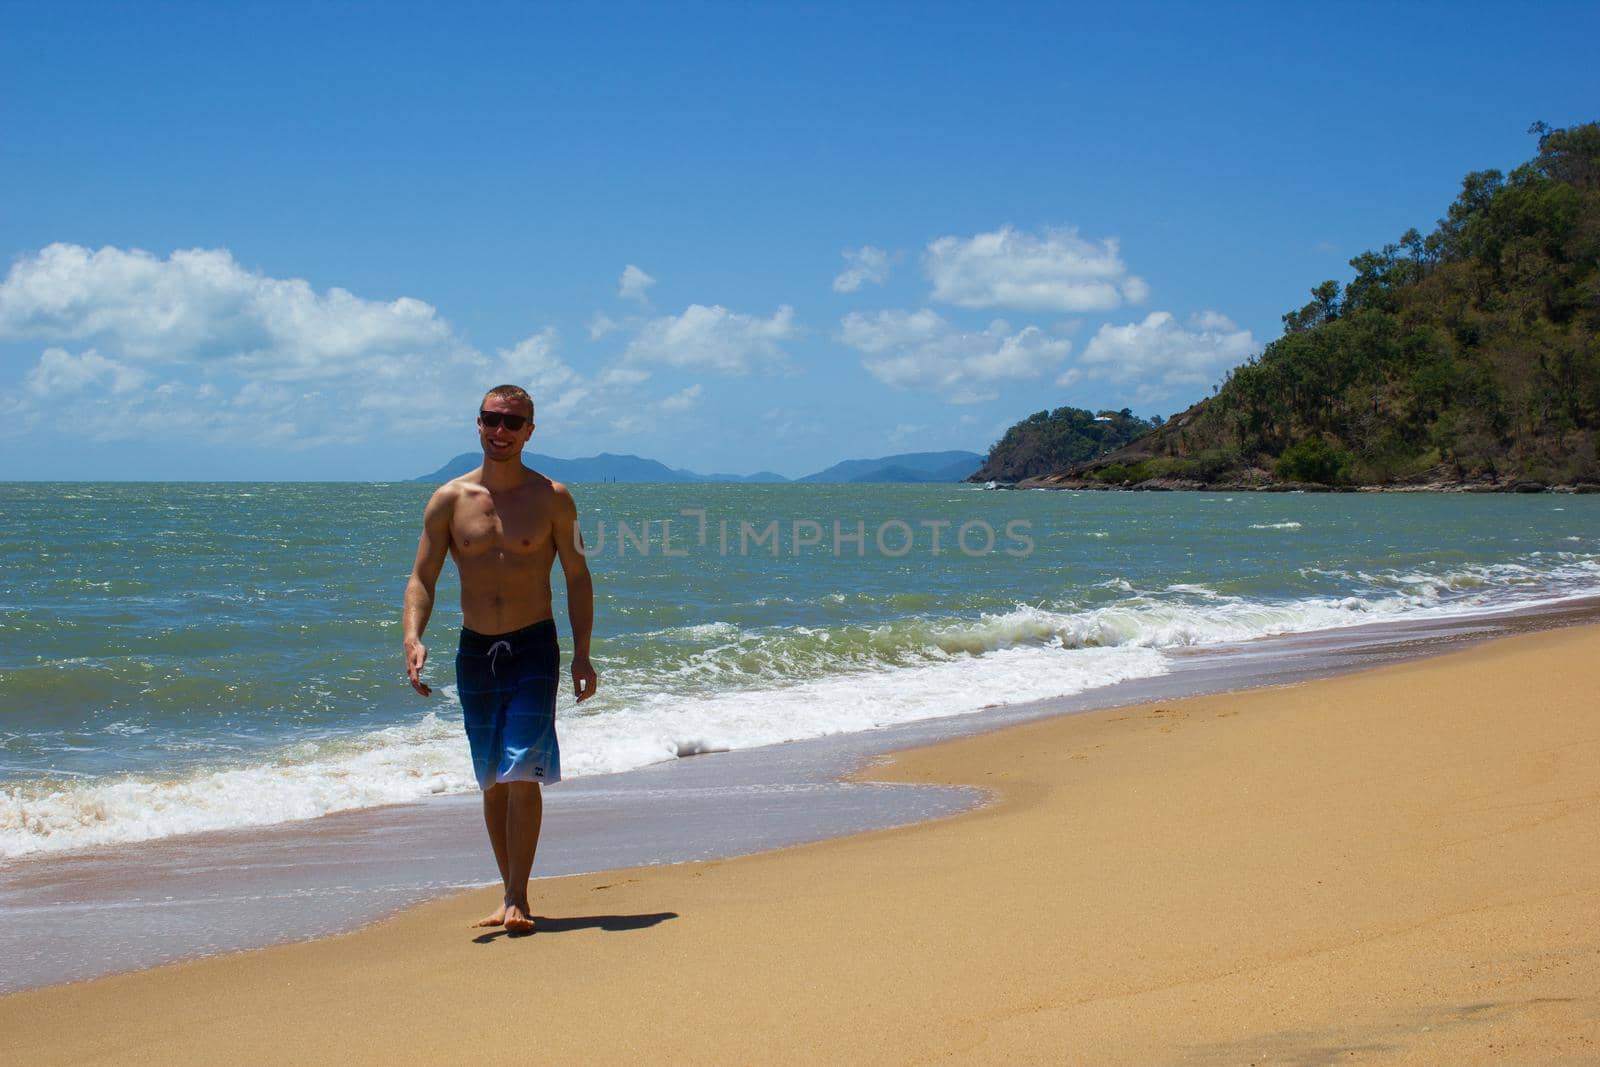 Muscular caucasian man walking on the beach and smiles as ocean waves crash behind him, cape tribulation, queensland, australia by bettercallcurry